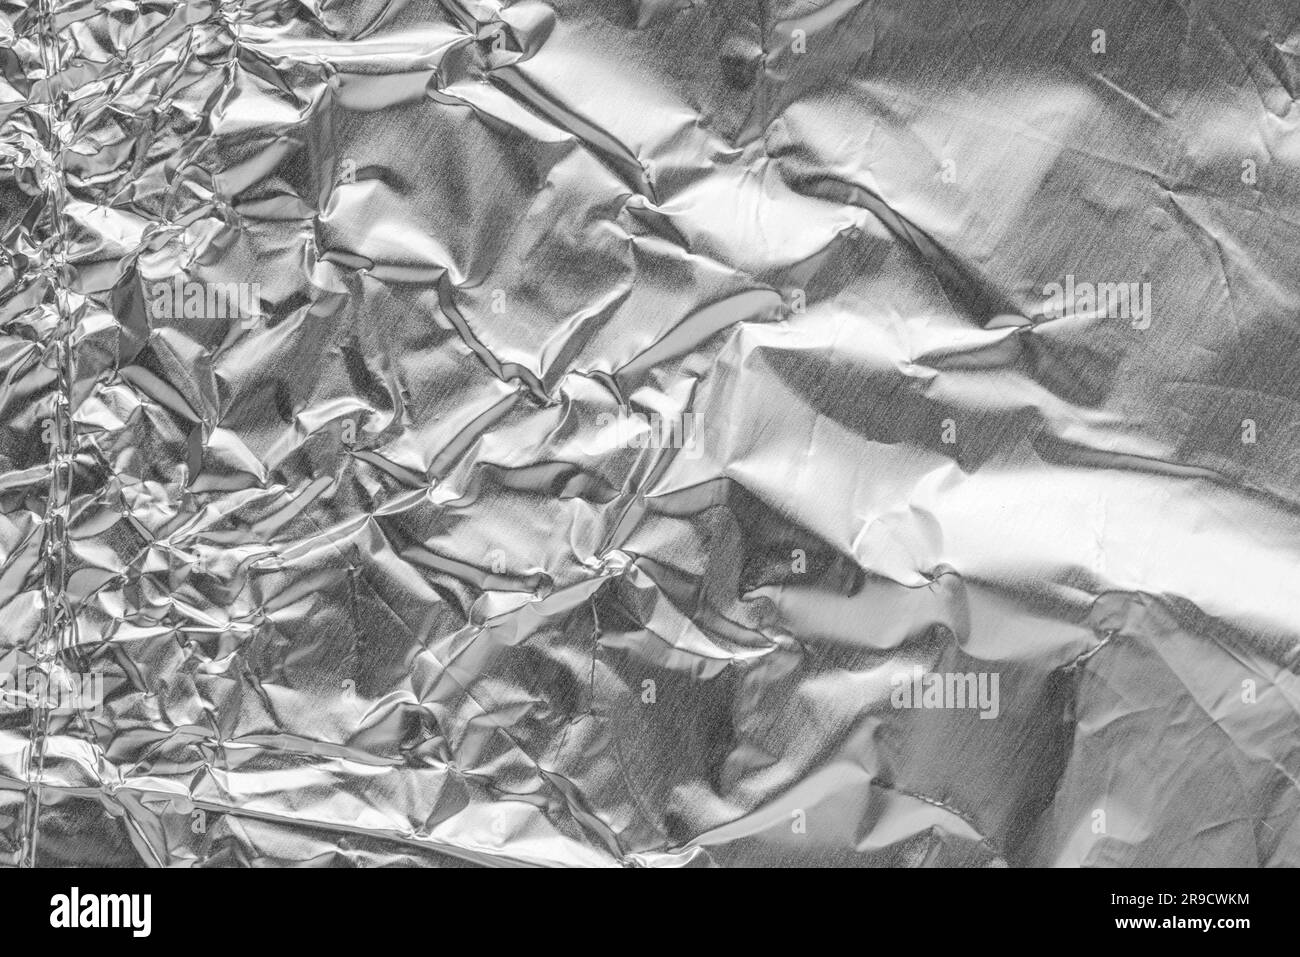 Crumpled bright shiny metallic silver aluminium foil background, flat lay view backdrop with copy space for text Stock Photo